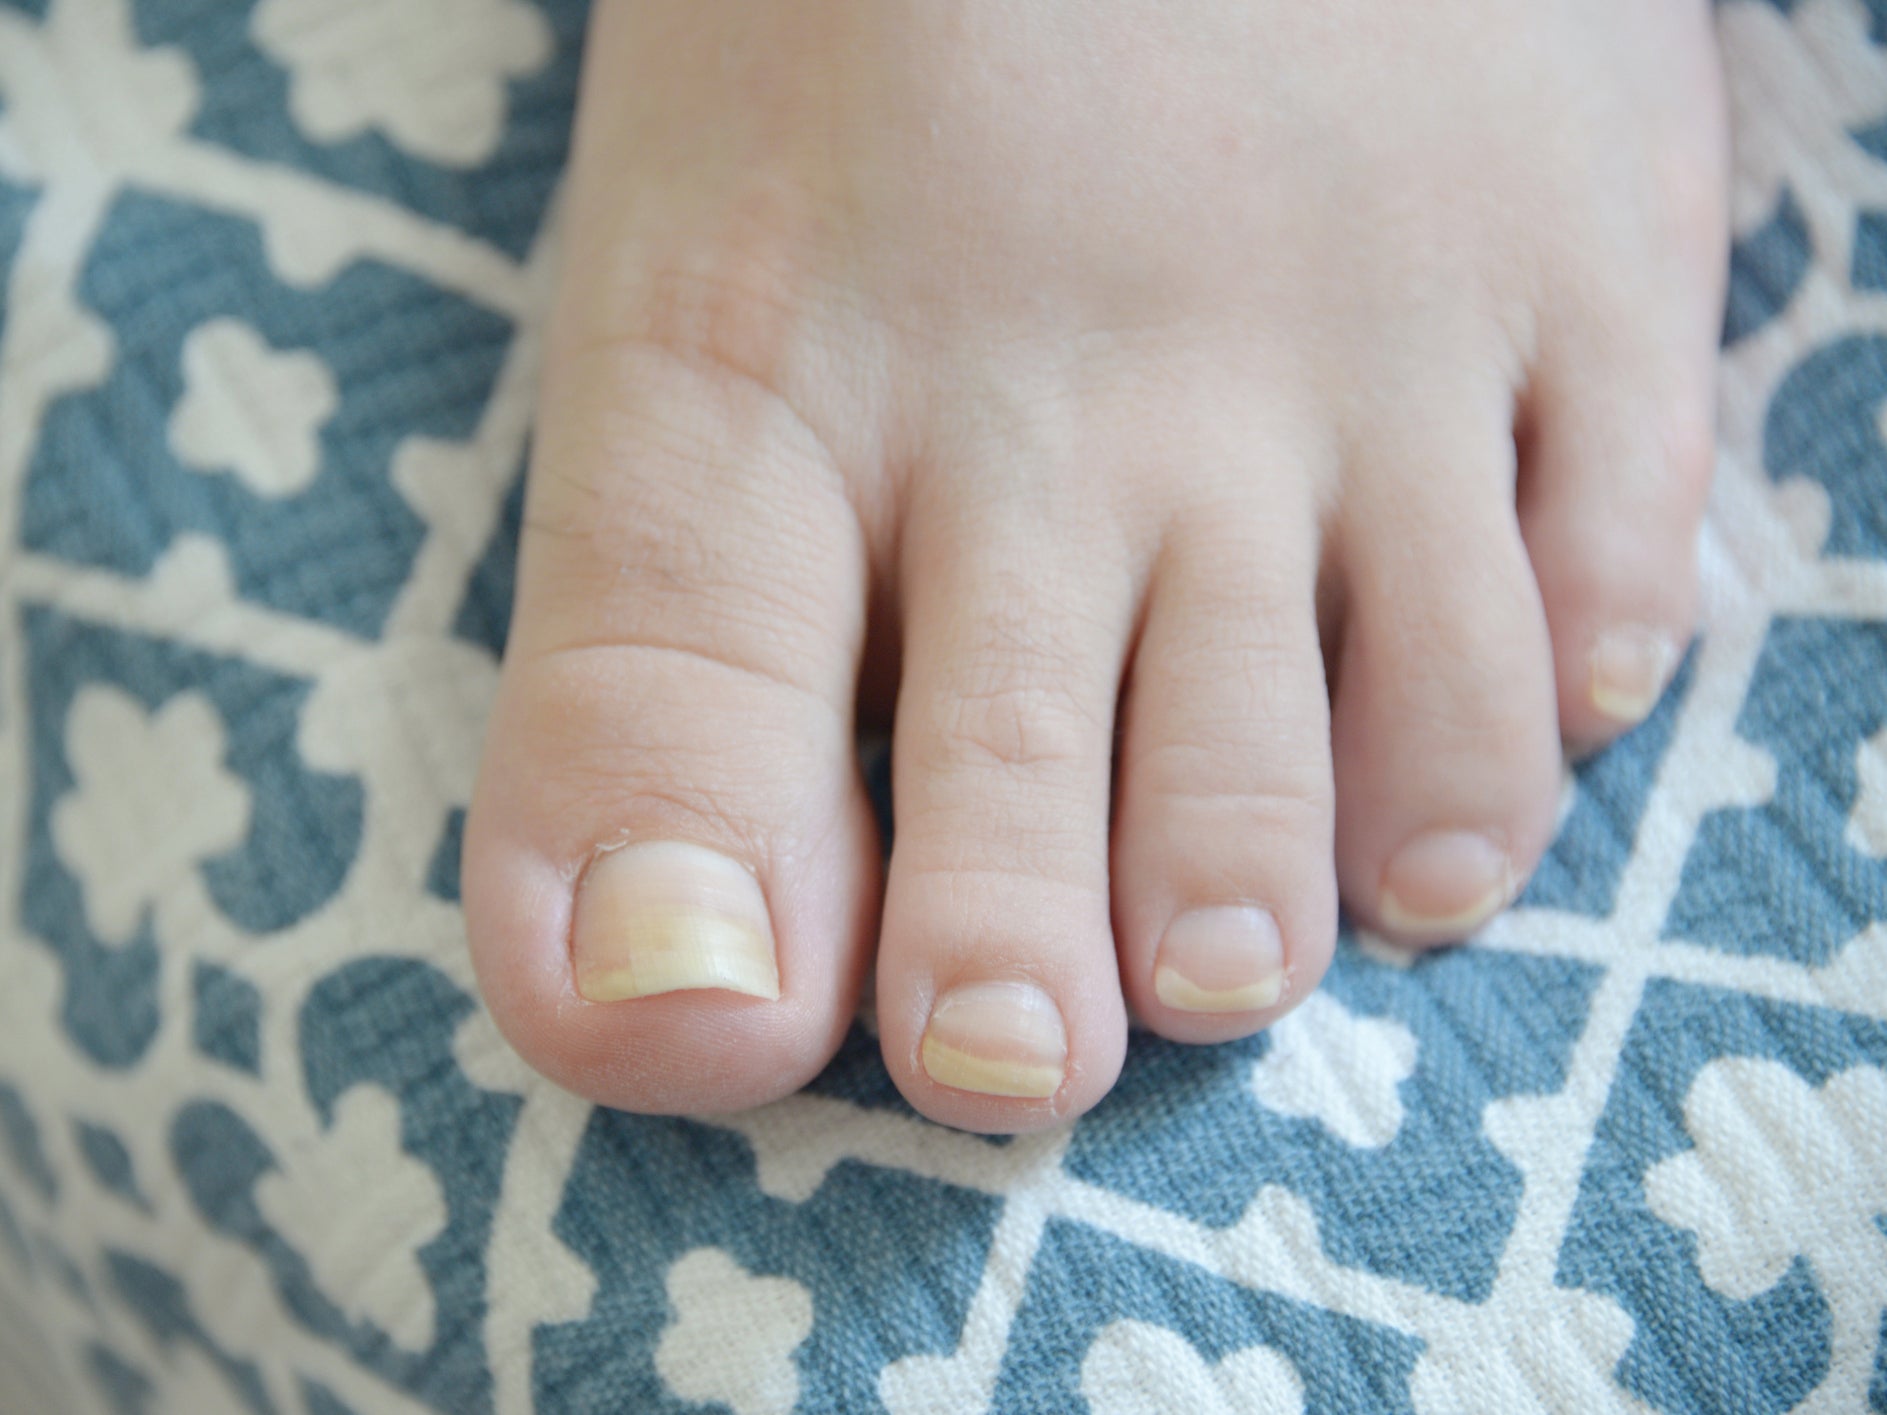 A 40 year old lady with rare fungal bone infection as cause of chronic  toenail deformity